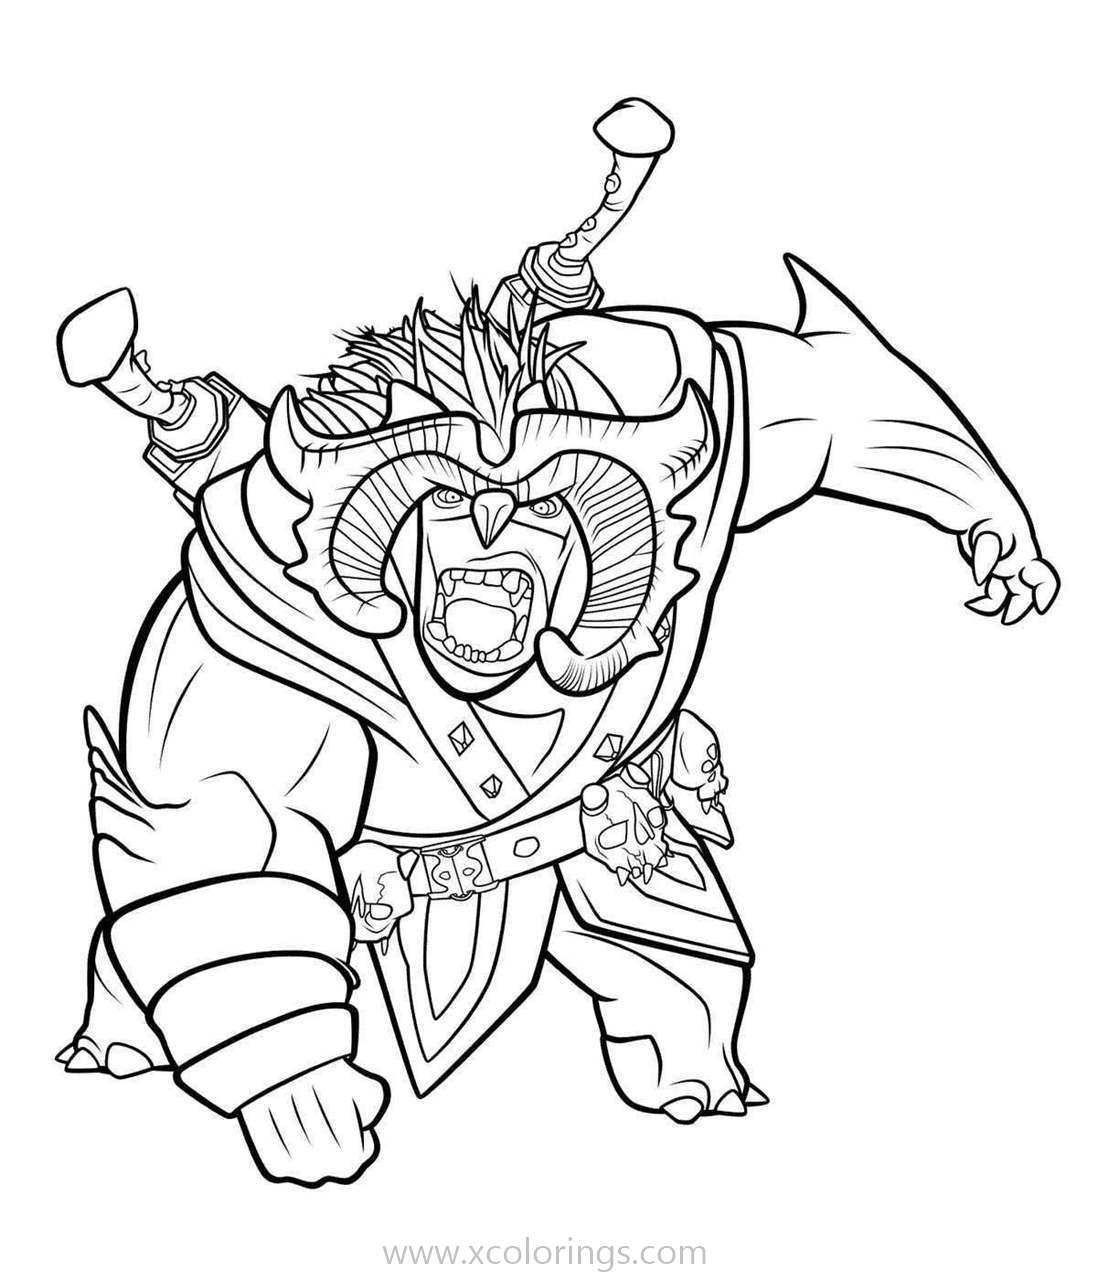 Trollhunters Troll Bular Coloring Pages - XColorings.com